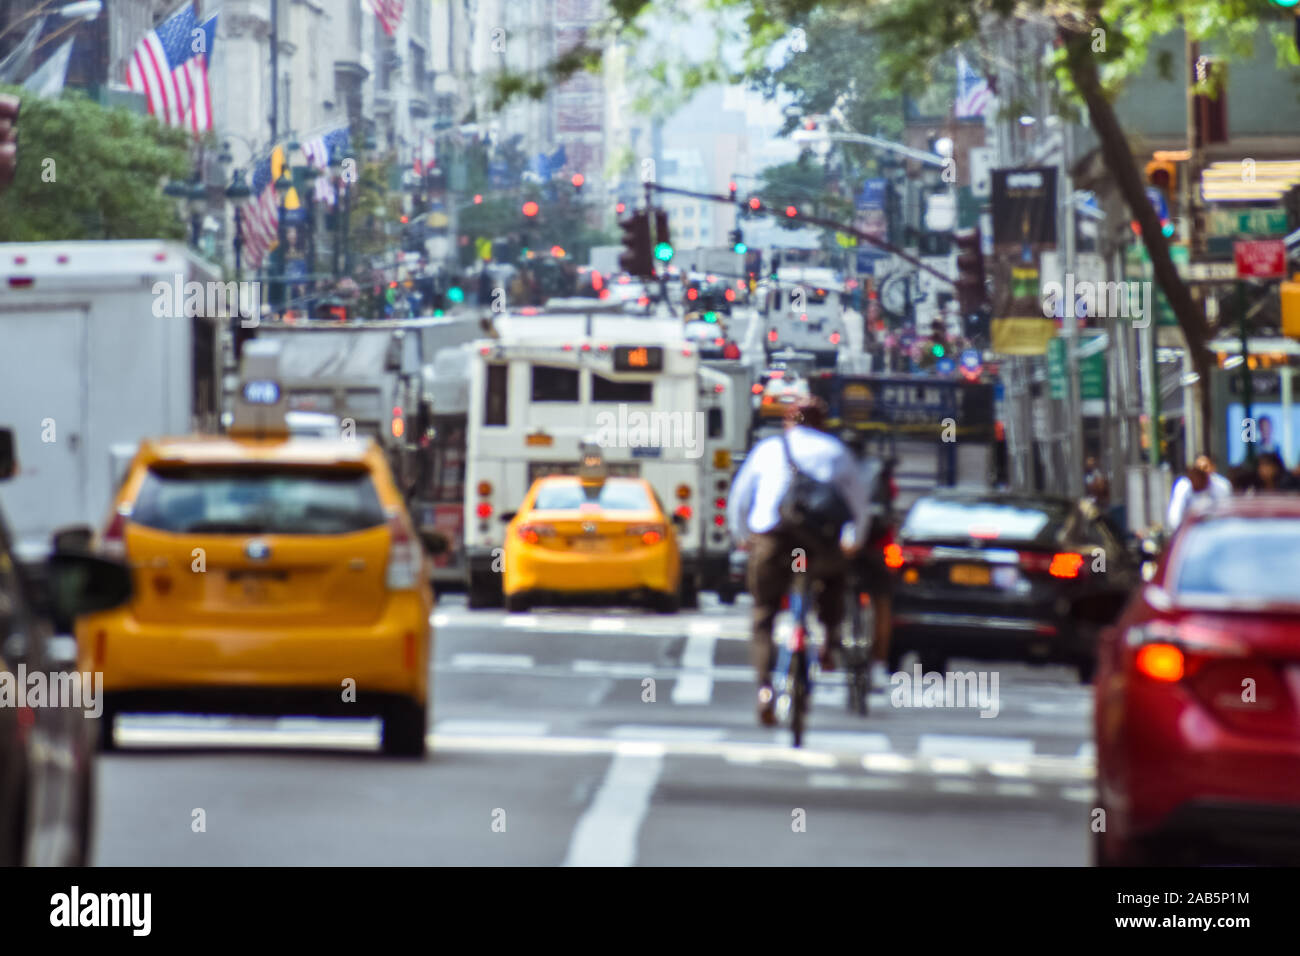 Blurred concept of the frenetic activity of life in New York. Cars, public transportation, bicyclists, pedestrians, buildings, signs and flags. Concep Stock Photo